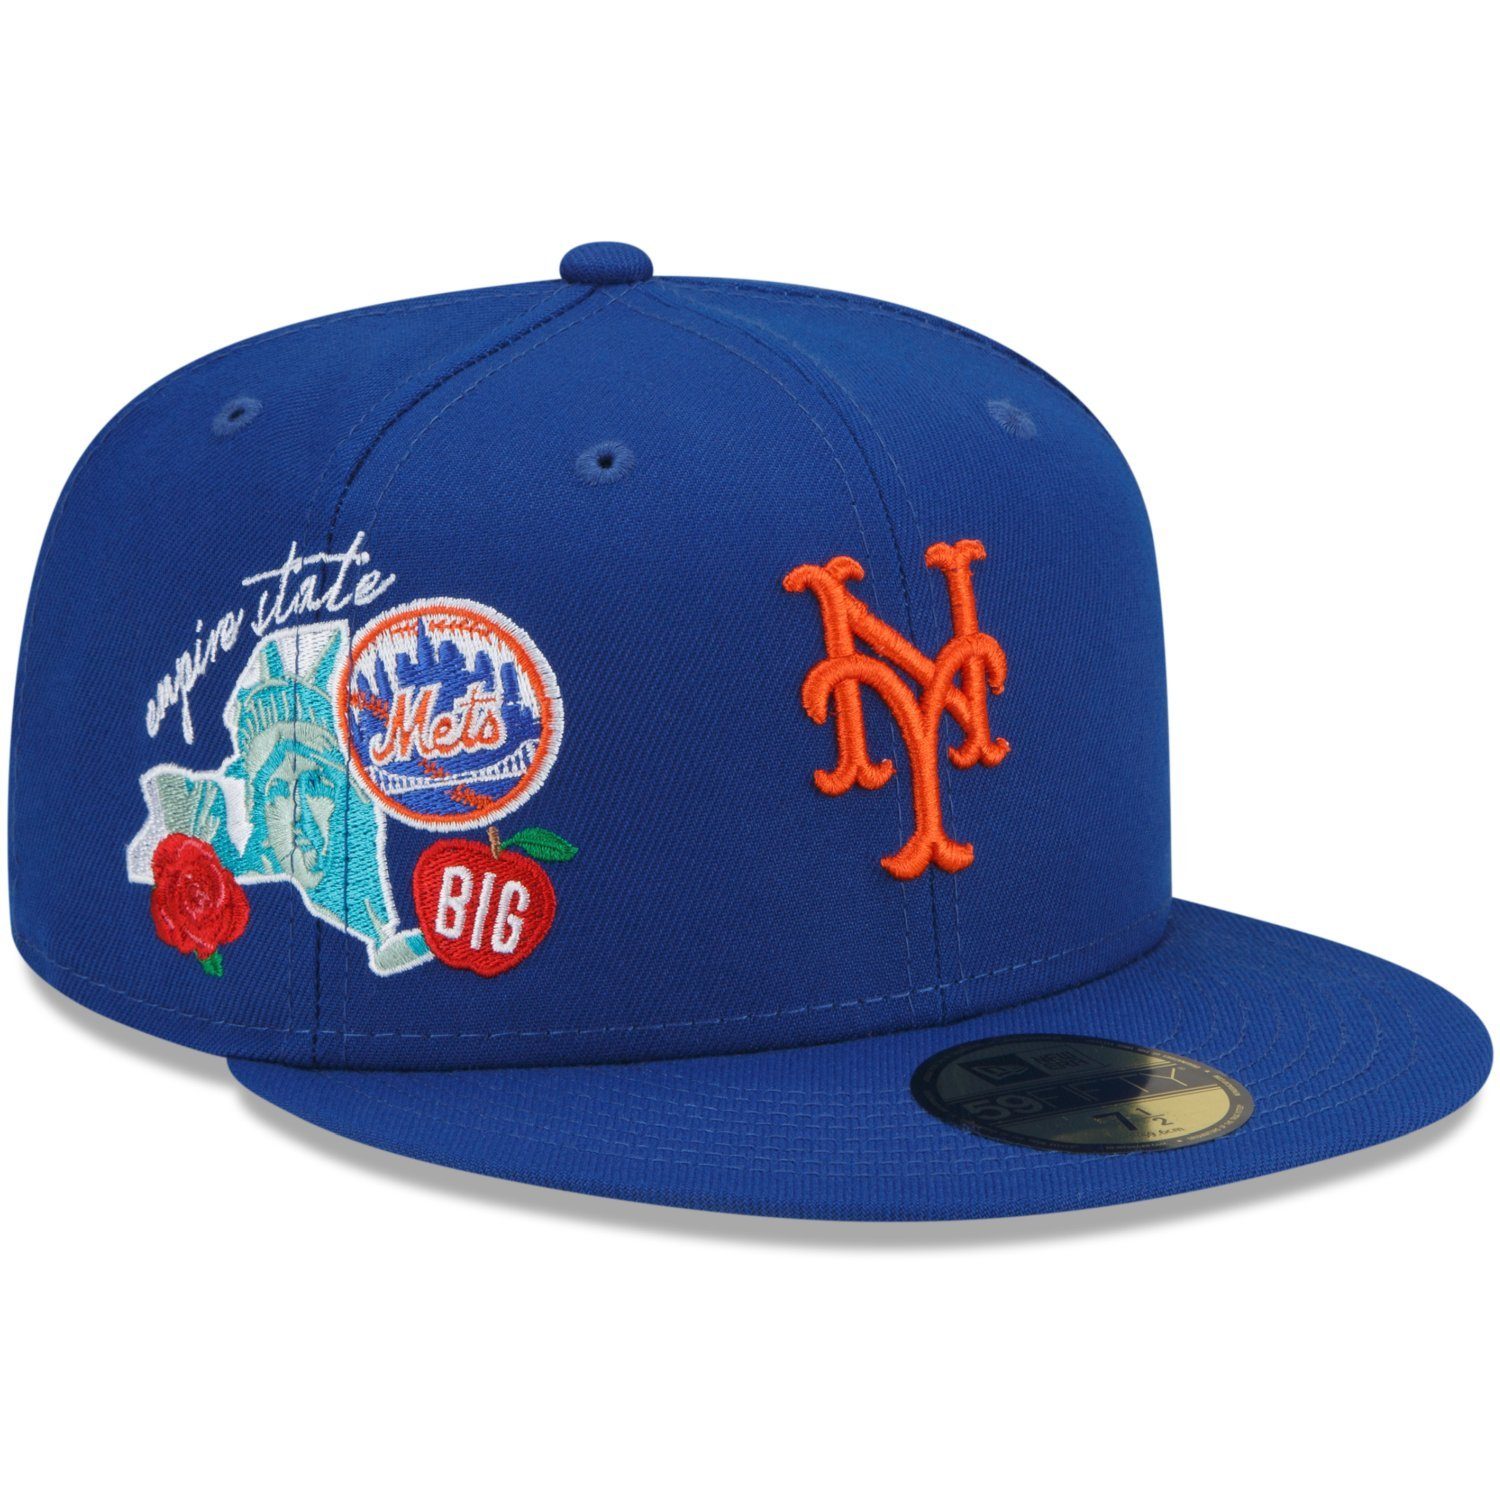 New Era Fitted Cap 59Fifty CITY CLUSTER New York Mets | Fitted Caps